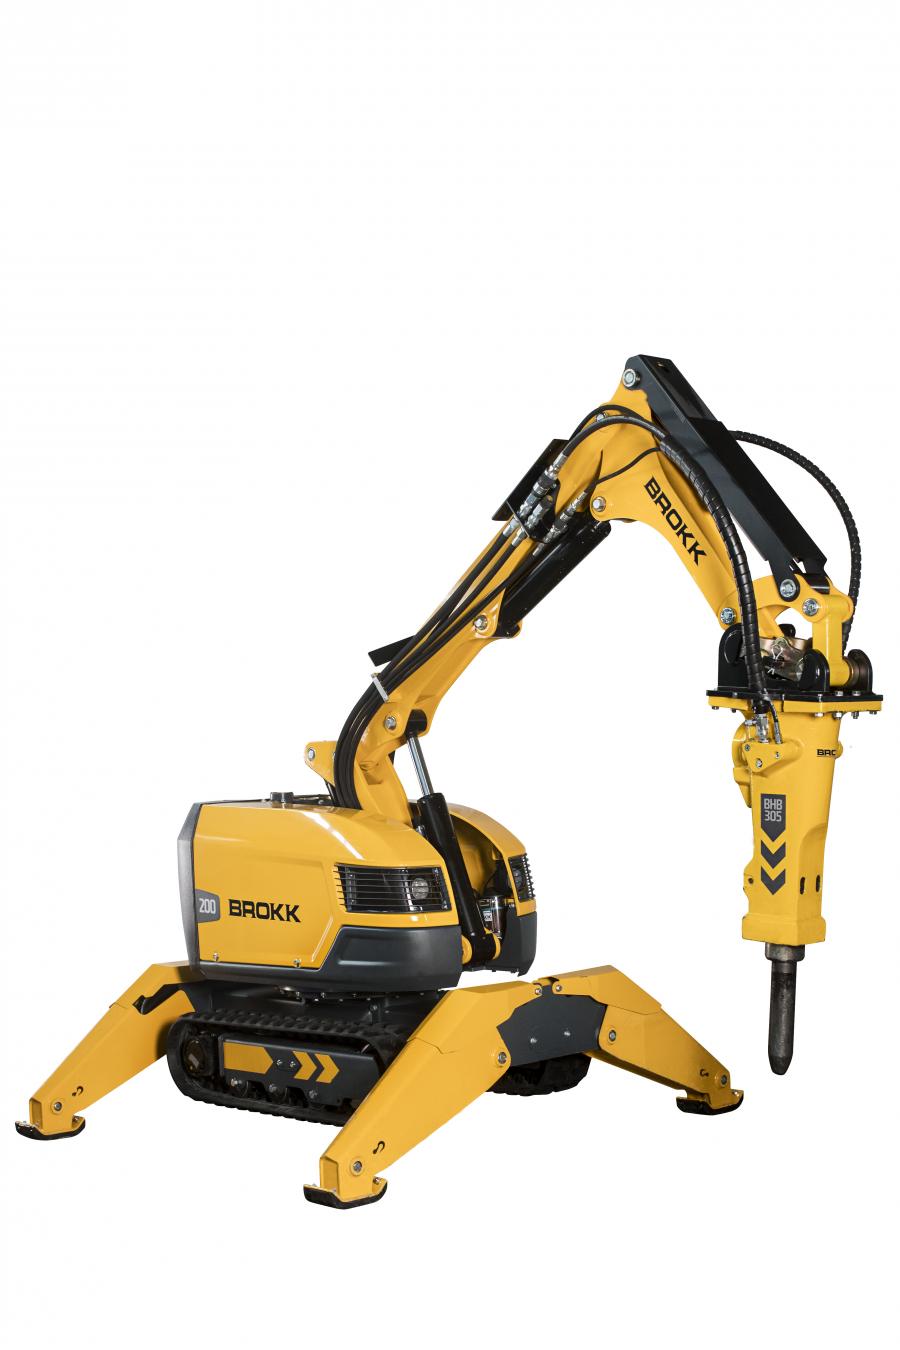 As part of Brokk’s Next Generation of remote-controlled demolition machines, the Brokk 200 is ideal for all-electric mines.